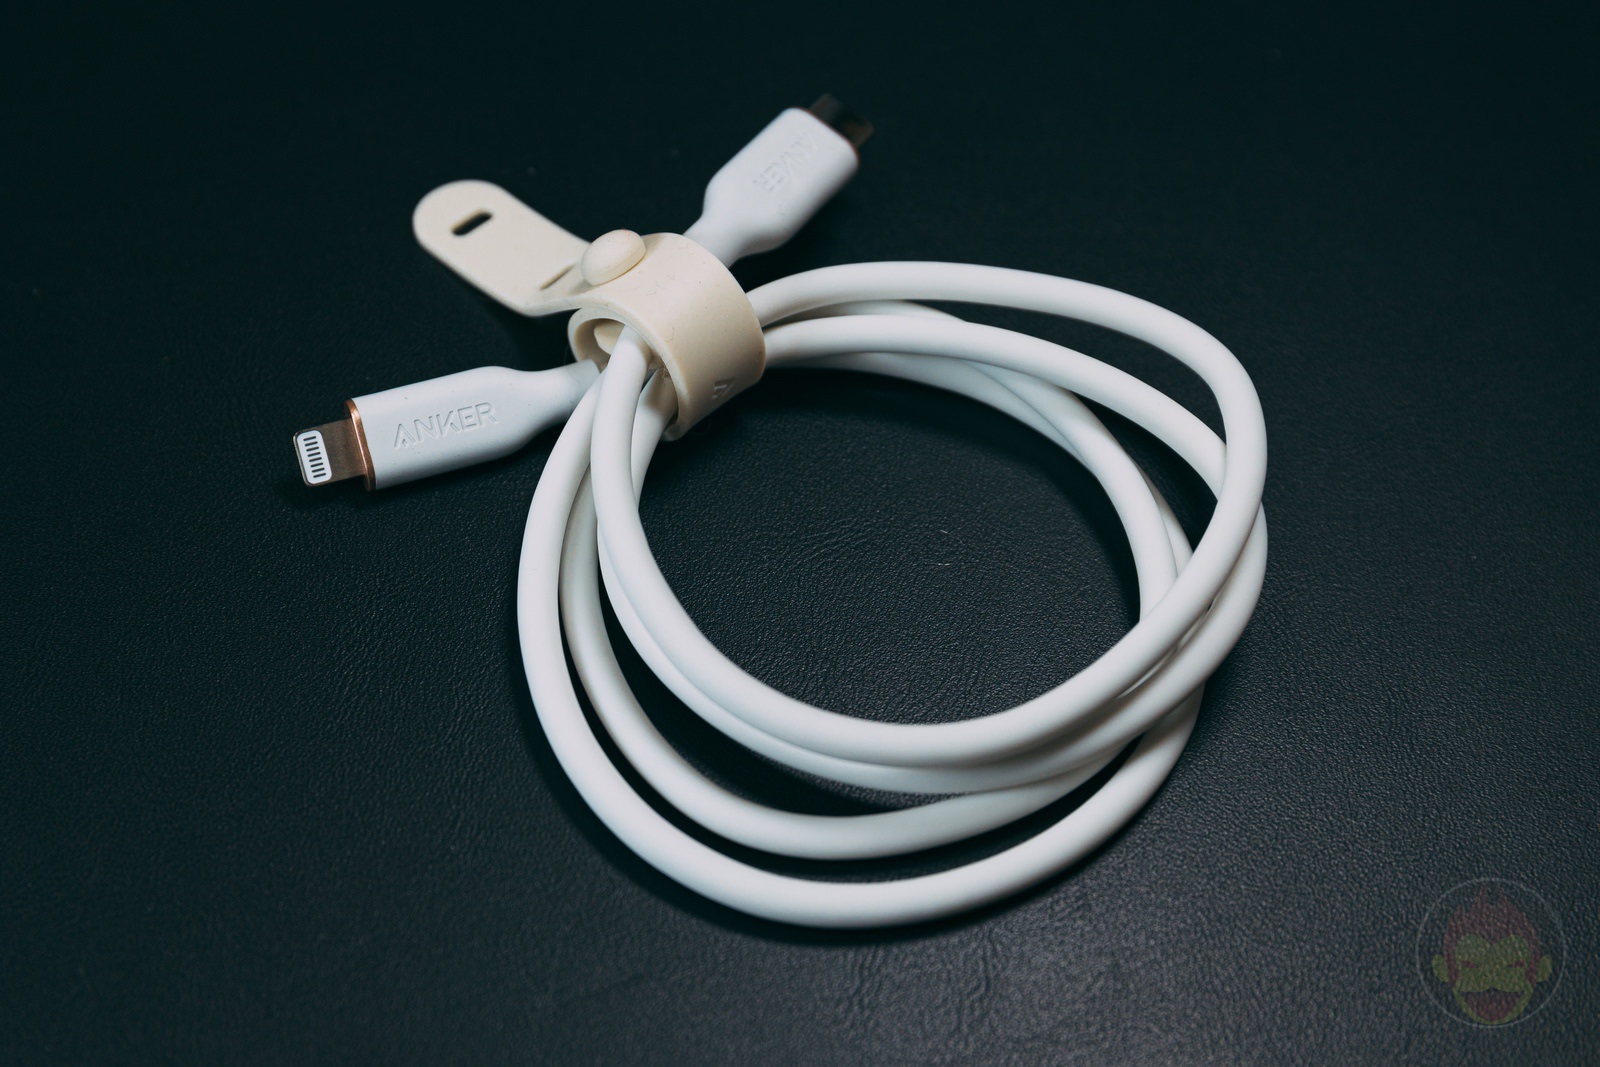 Anker-PowerLine-III-Flow-USBC-to-Lightning-Cable-Review-07.jpg